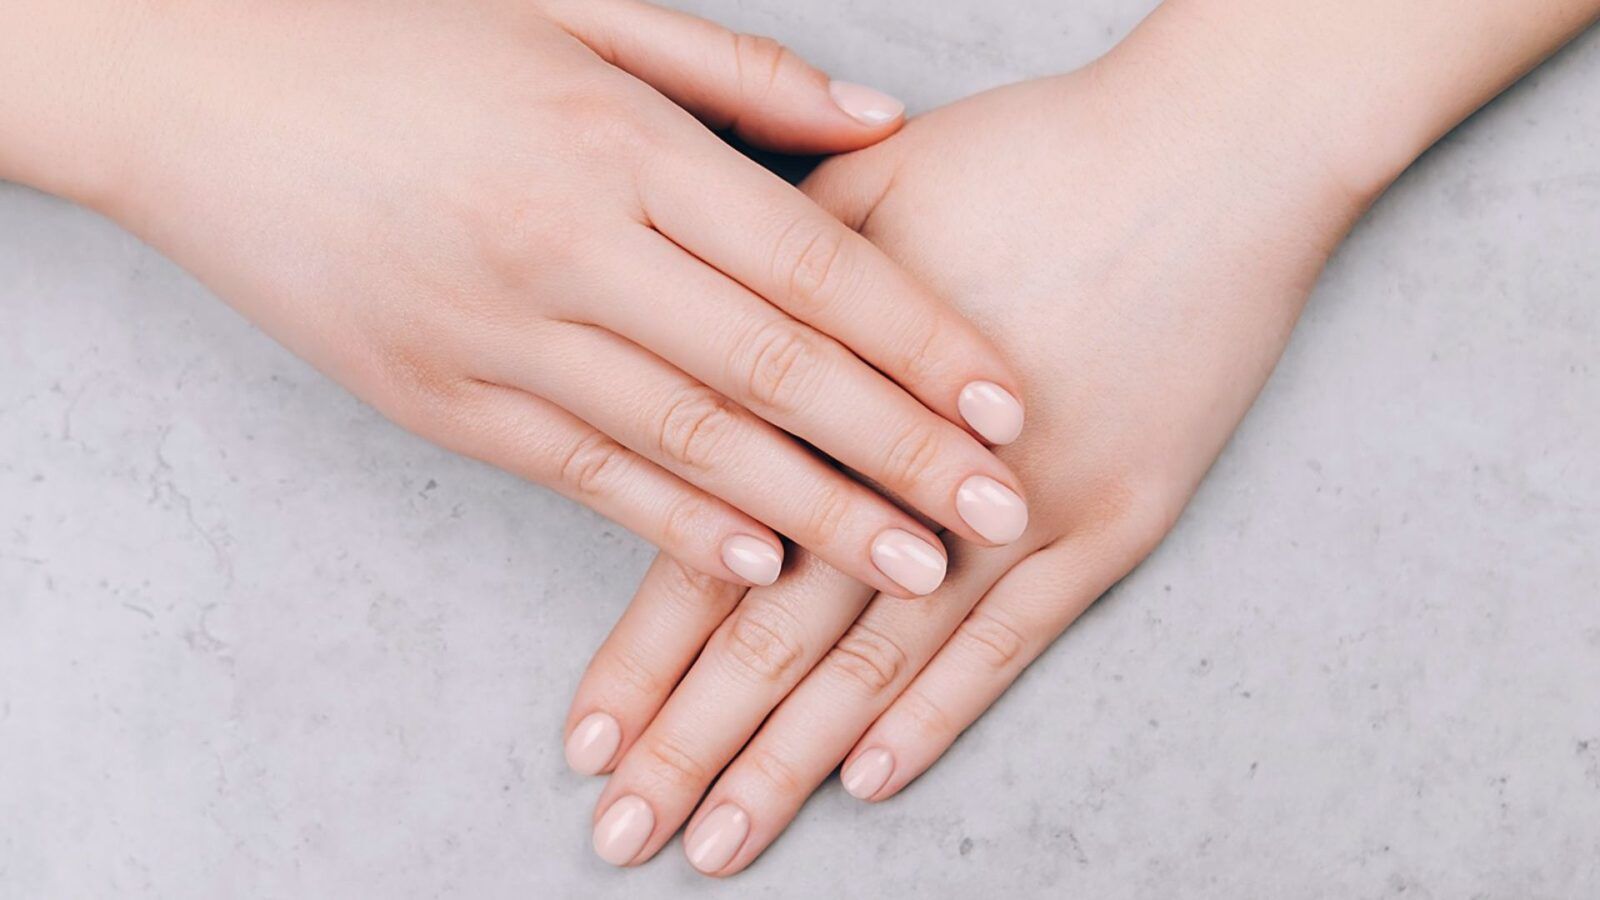 Eat these 7 foods to make your nails grow faster and stronger